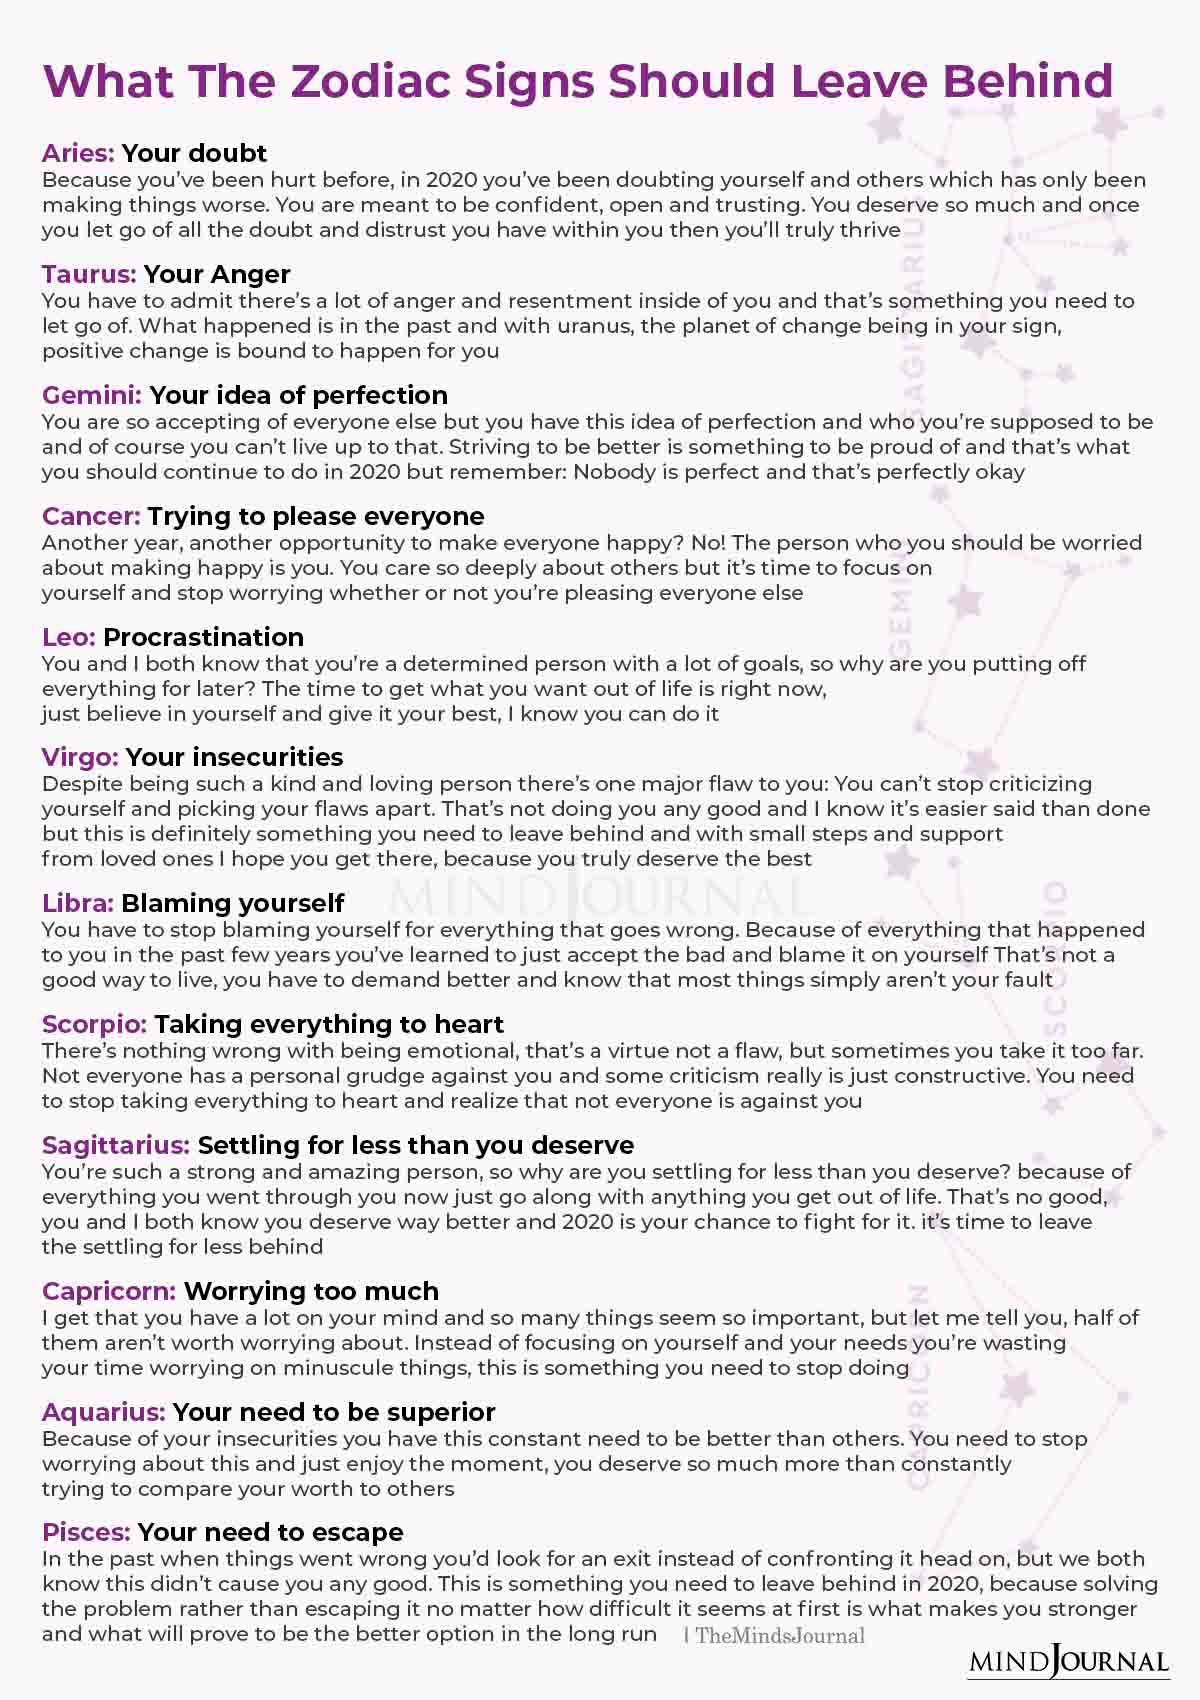 What The Zodiac Signs Should Leave Behind